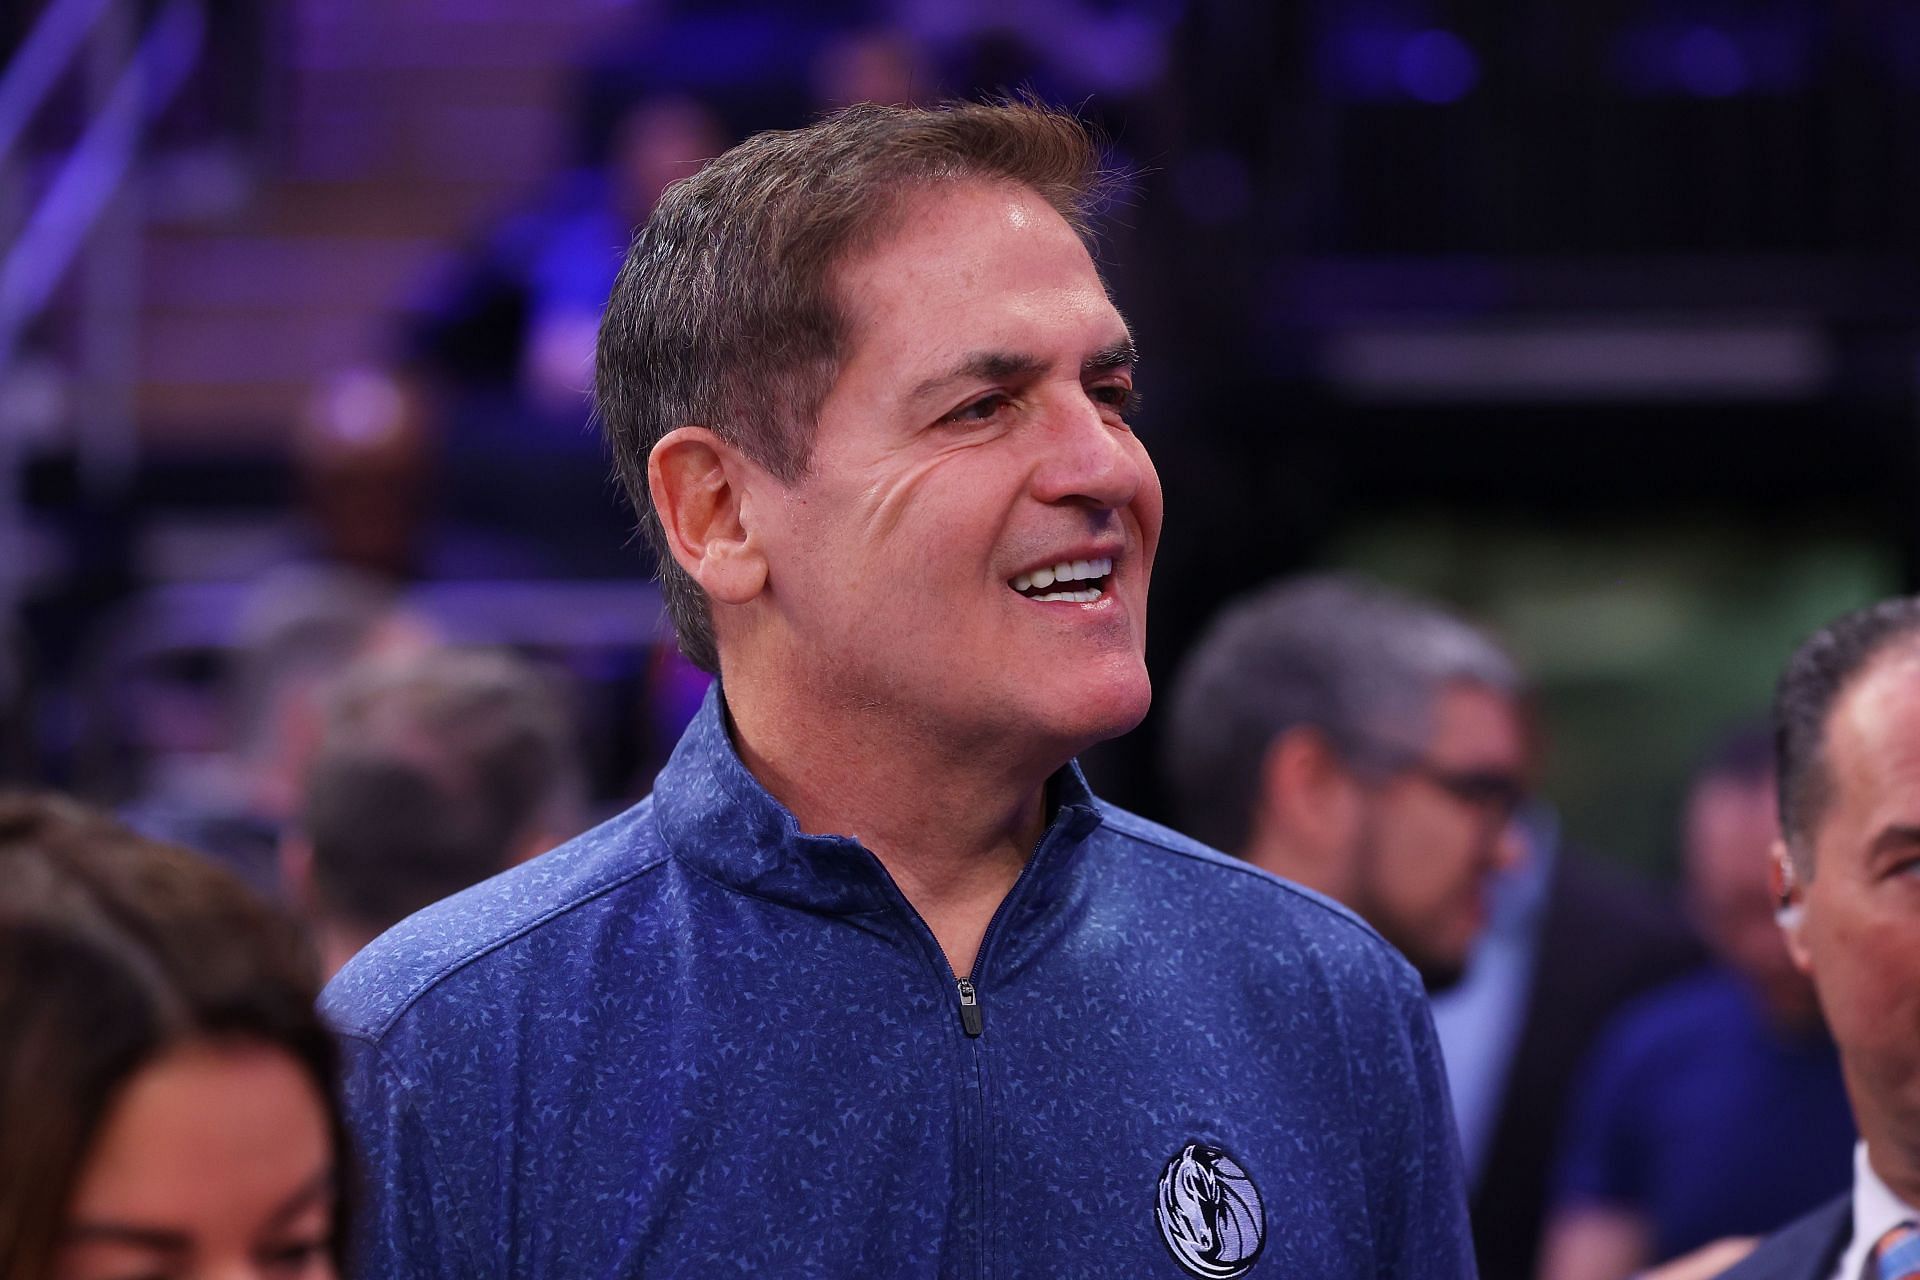 Cuban is part of numerous companies and is a majority owner of the Mavericks. (Image via Getty Images)